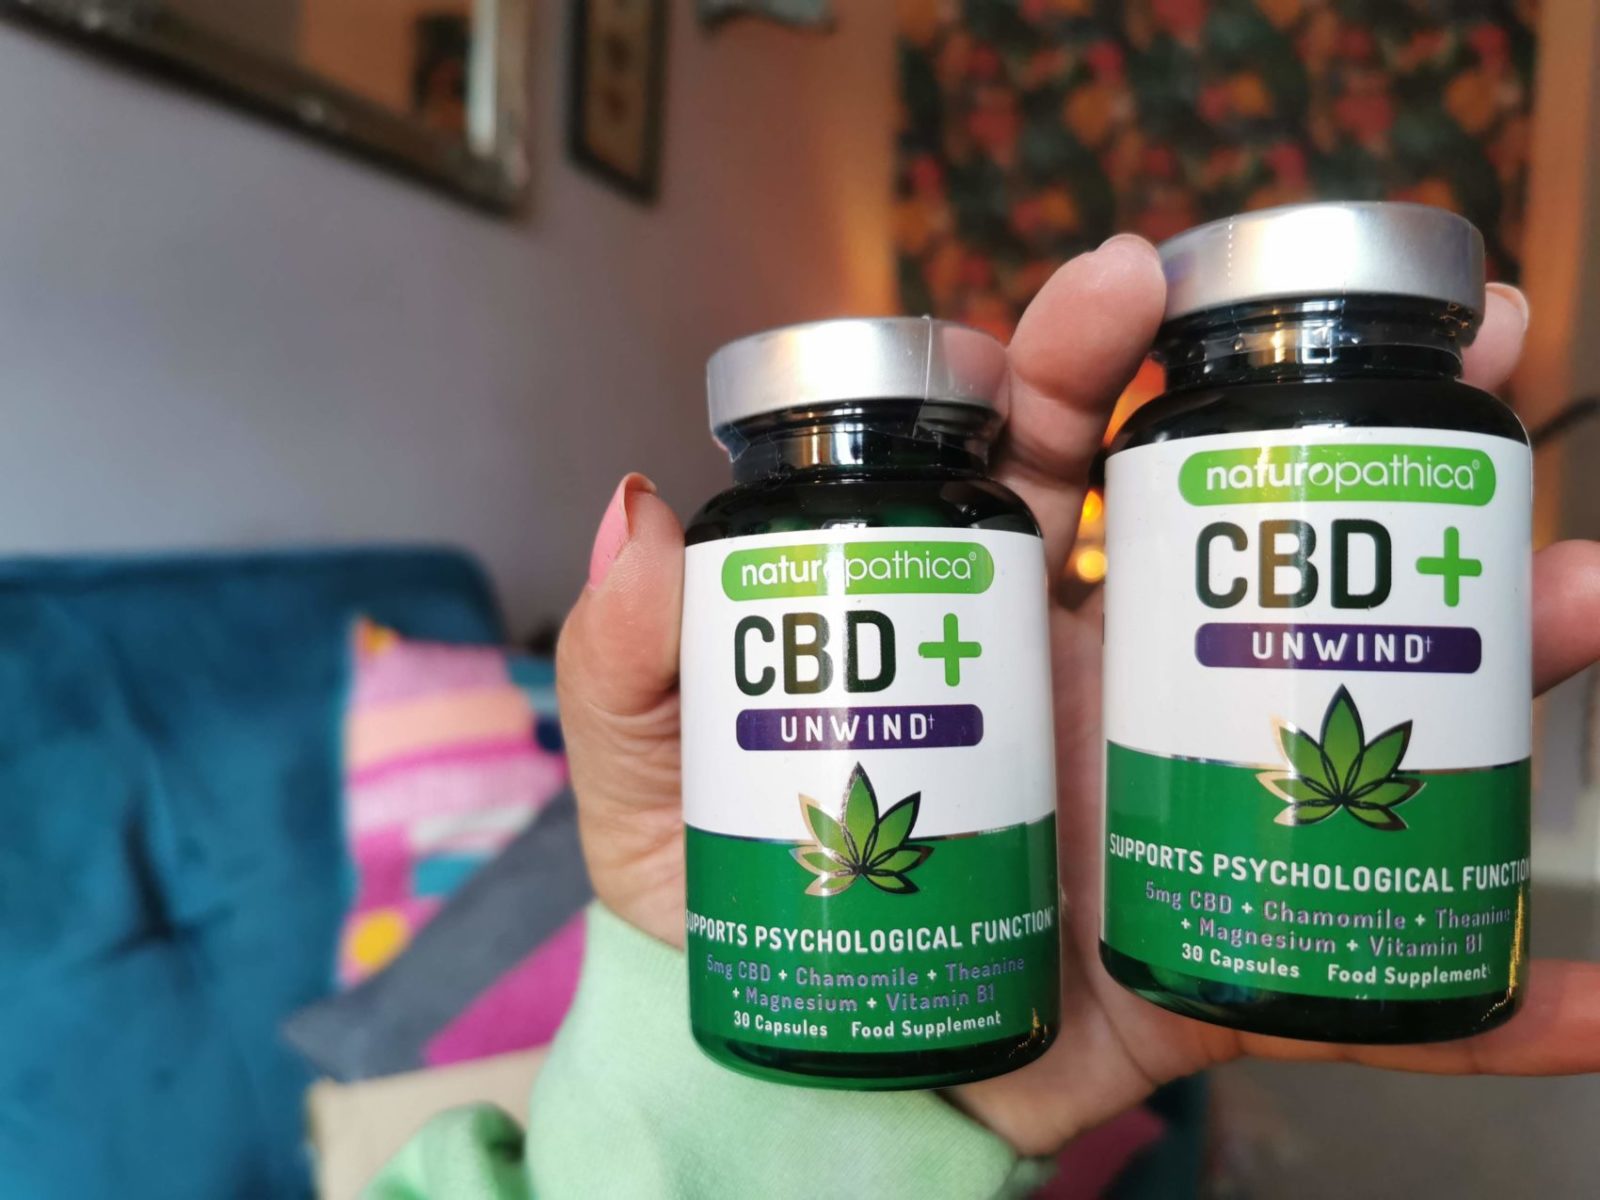 Naturapathica CBD Review